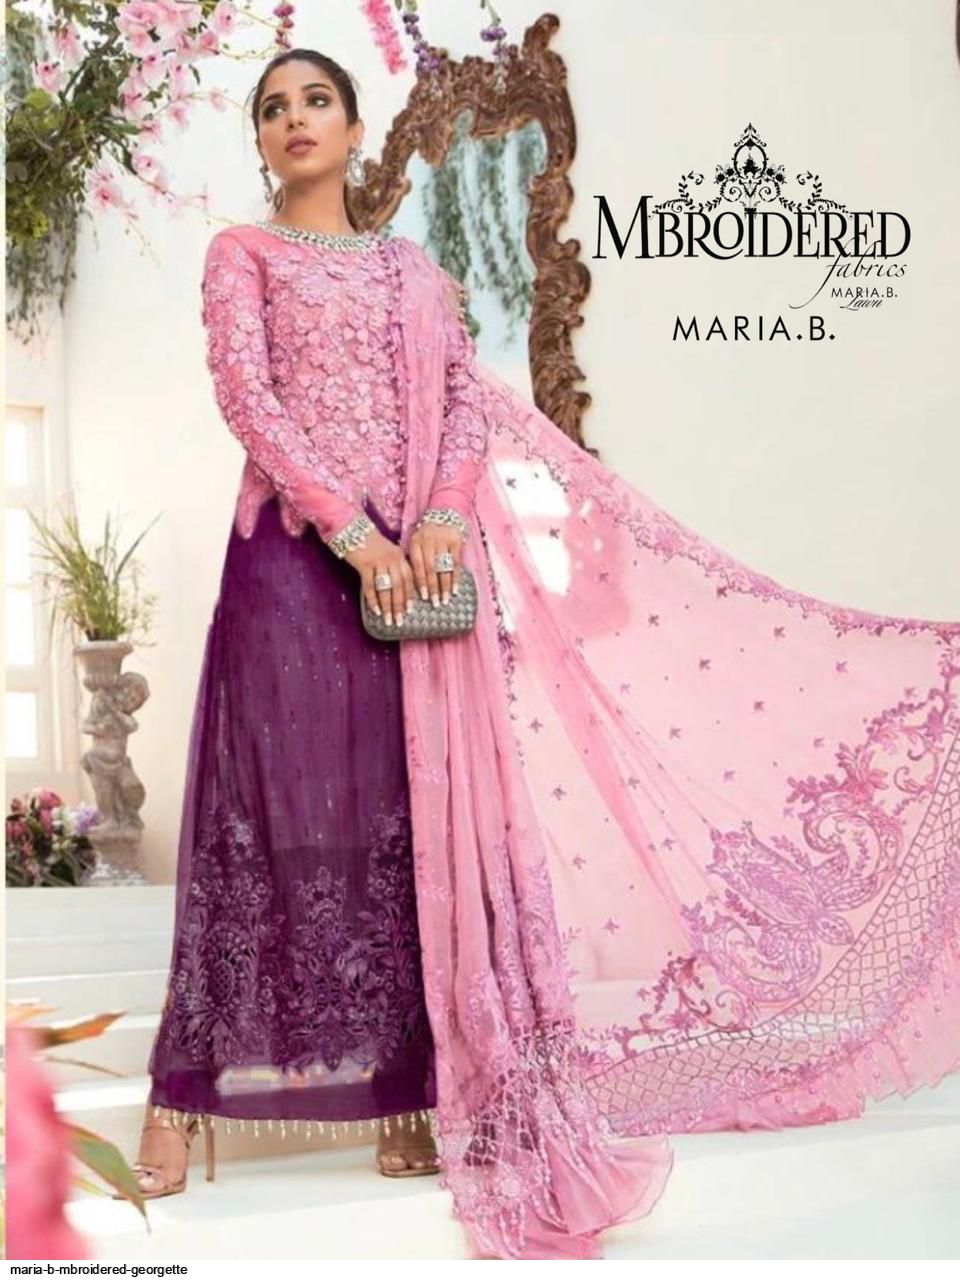 MARIA B MBROIDERED Georgette